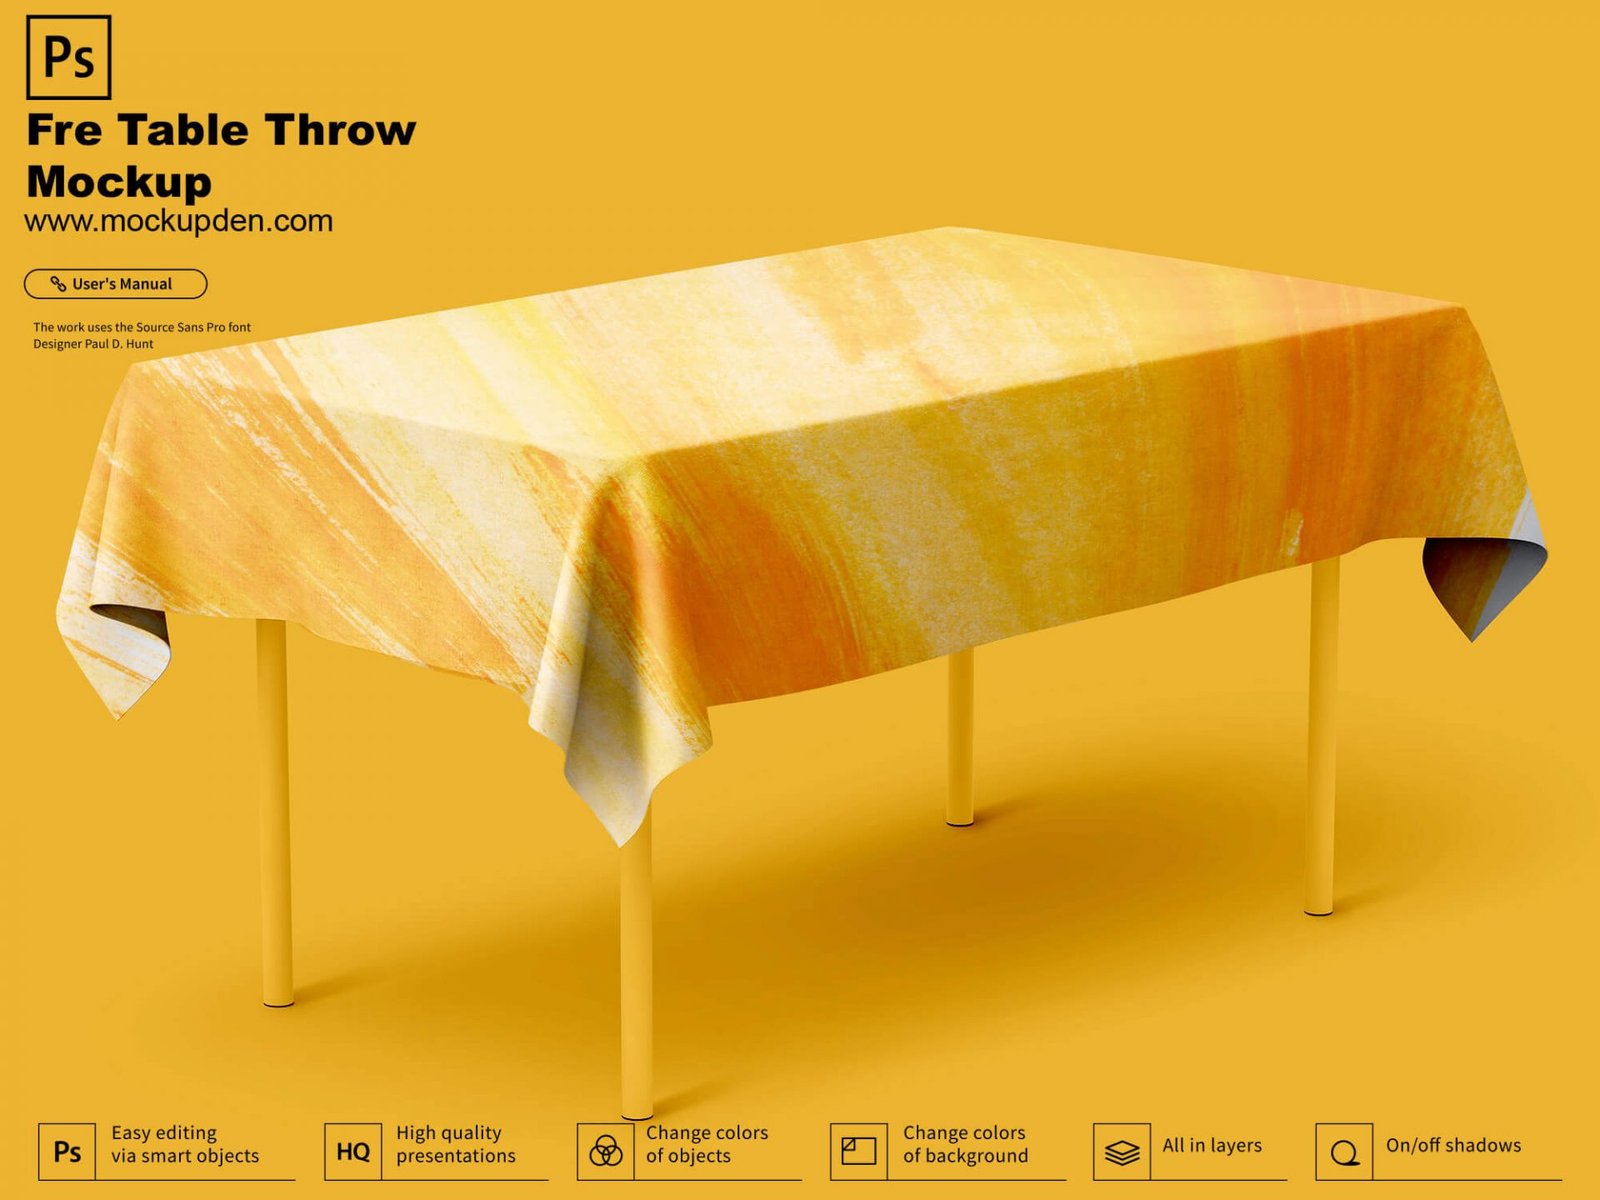 Download Free Table Throw Mockup PSD Template - Mockup Den